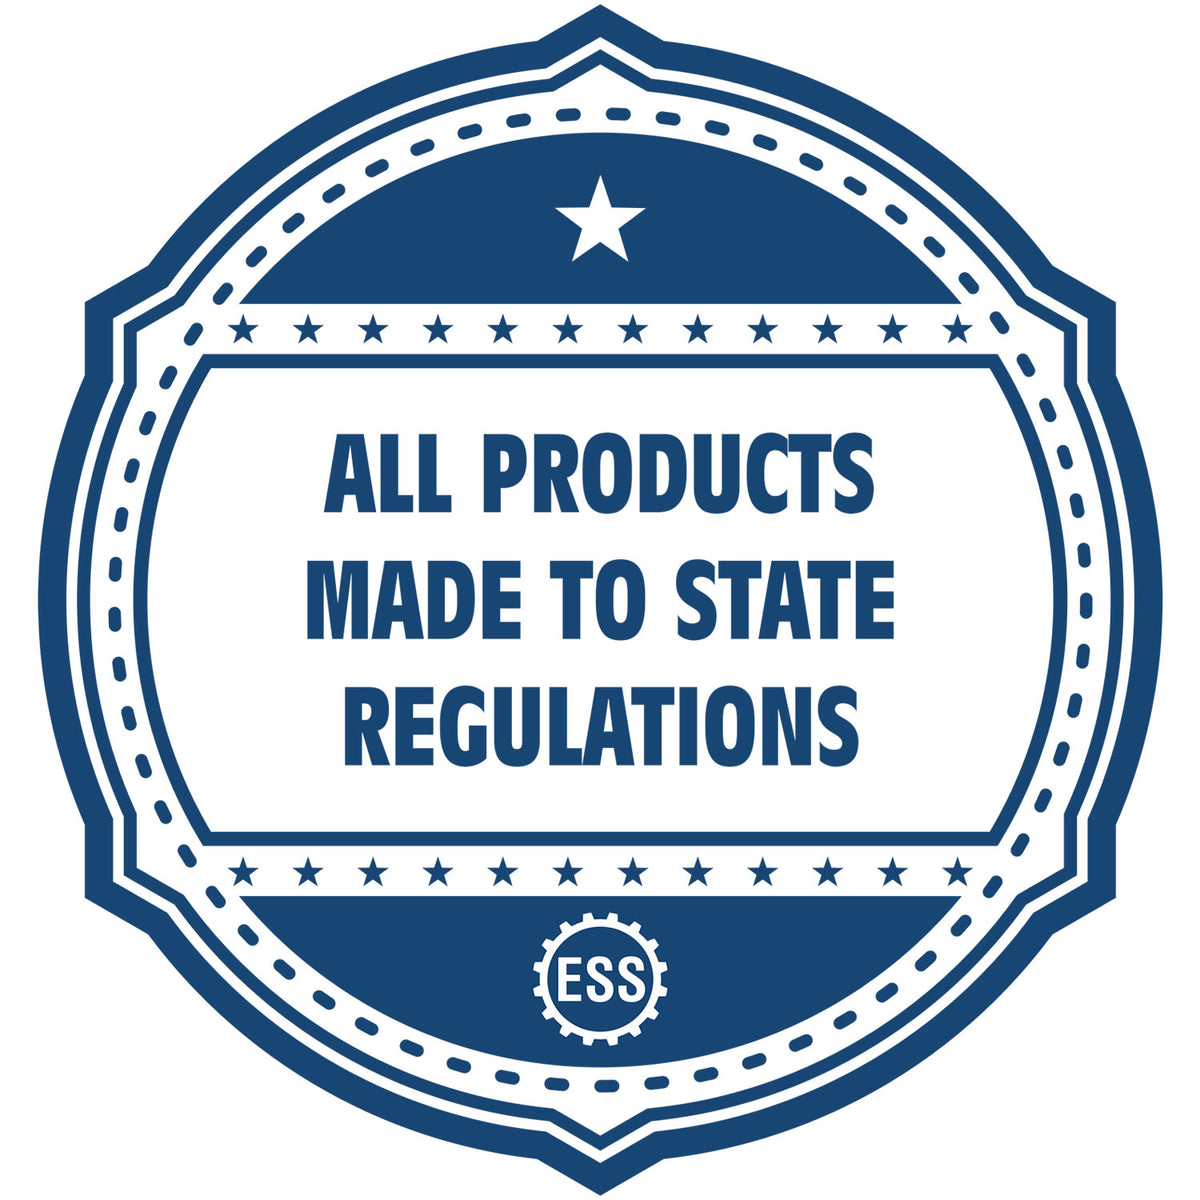 An icon or badge element for the Wooden Handle North Carolina State Seal Notary Public Stamp showing that this product is made in compliance with state regulations.